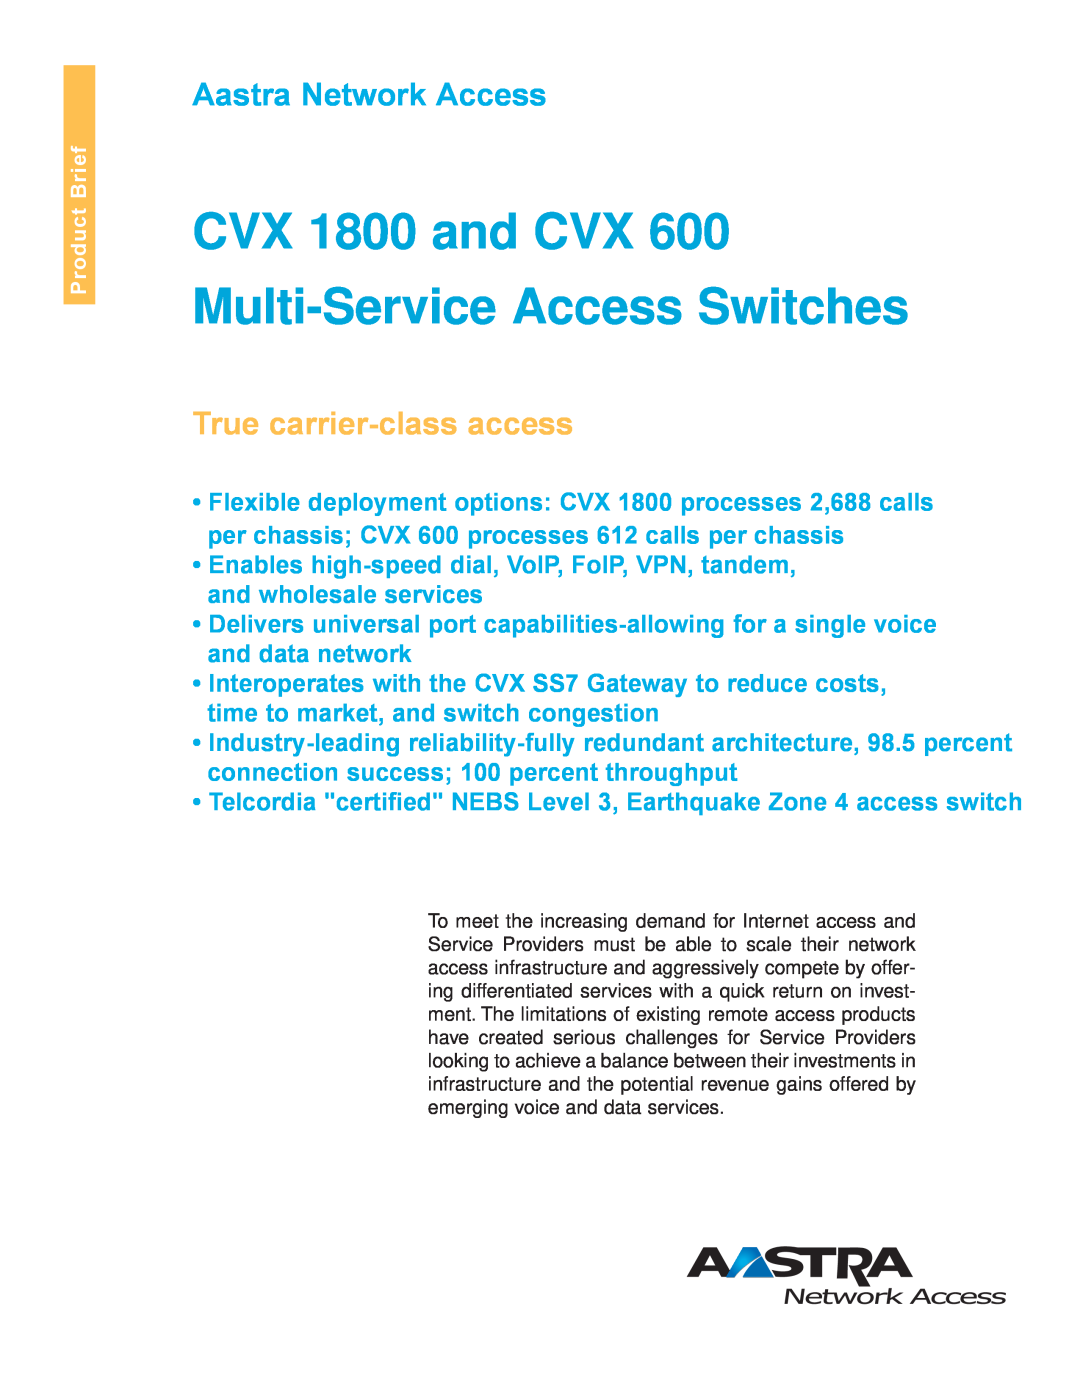 Aastra Telecom manual CVX 1800 and CVX Multi-Service Access Switches, Aastra Network Access, True carrier-class access 